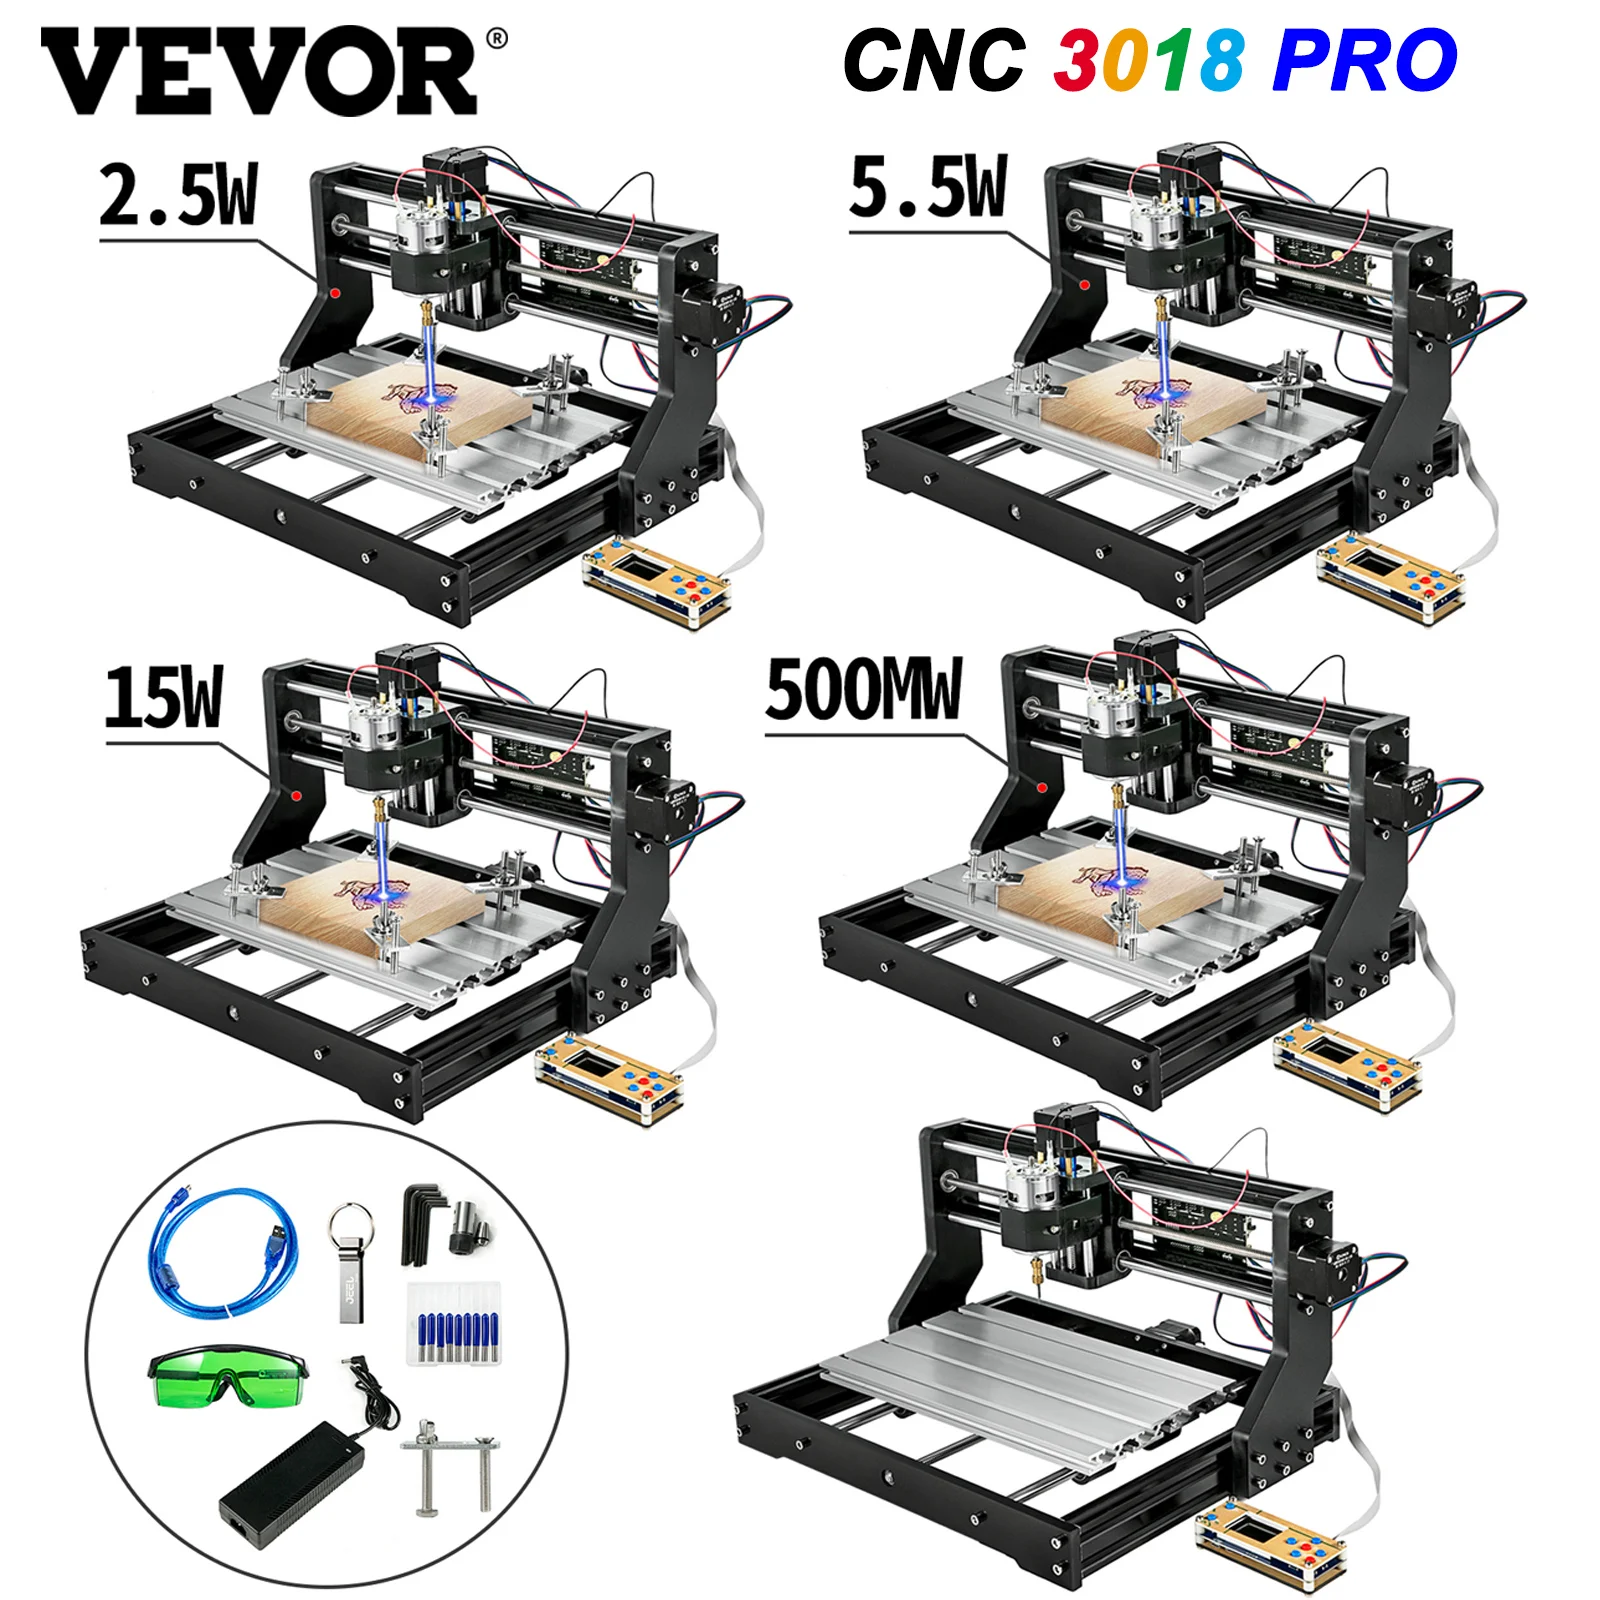 

VEVOR CNC 3018 PRO Laser Engraver 3 Axis Wood Router Engraving Machine GRBL with Laser Head ER11 Milling Machine for DIY PCB PVC